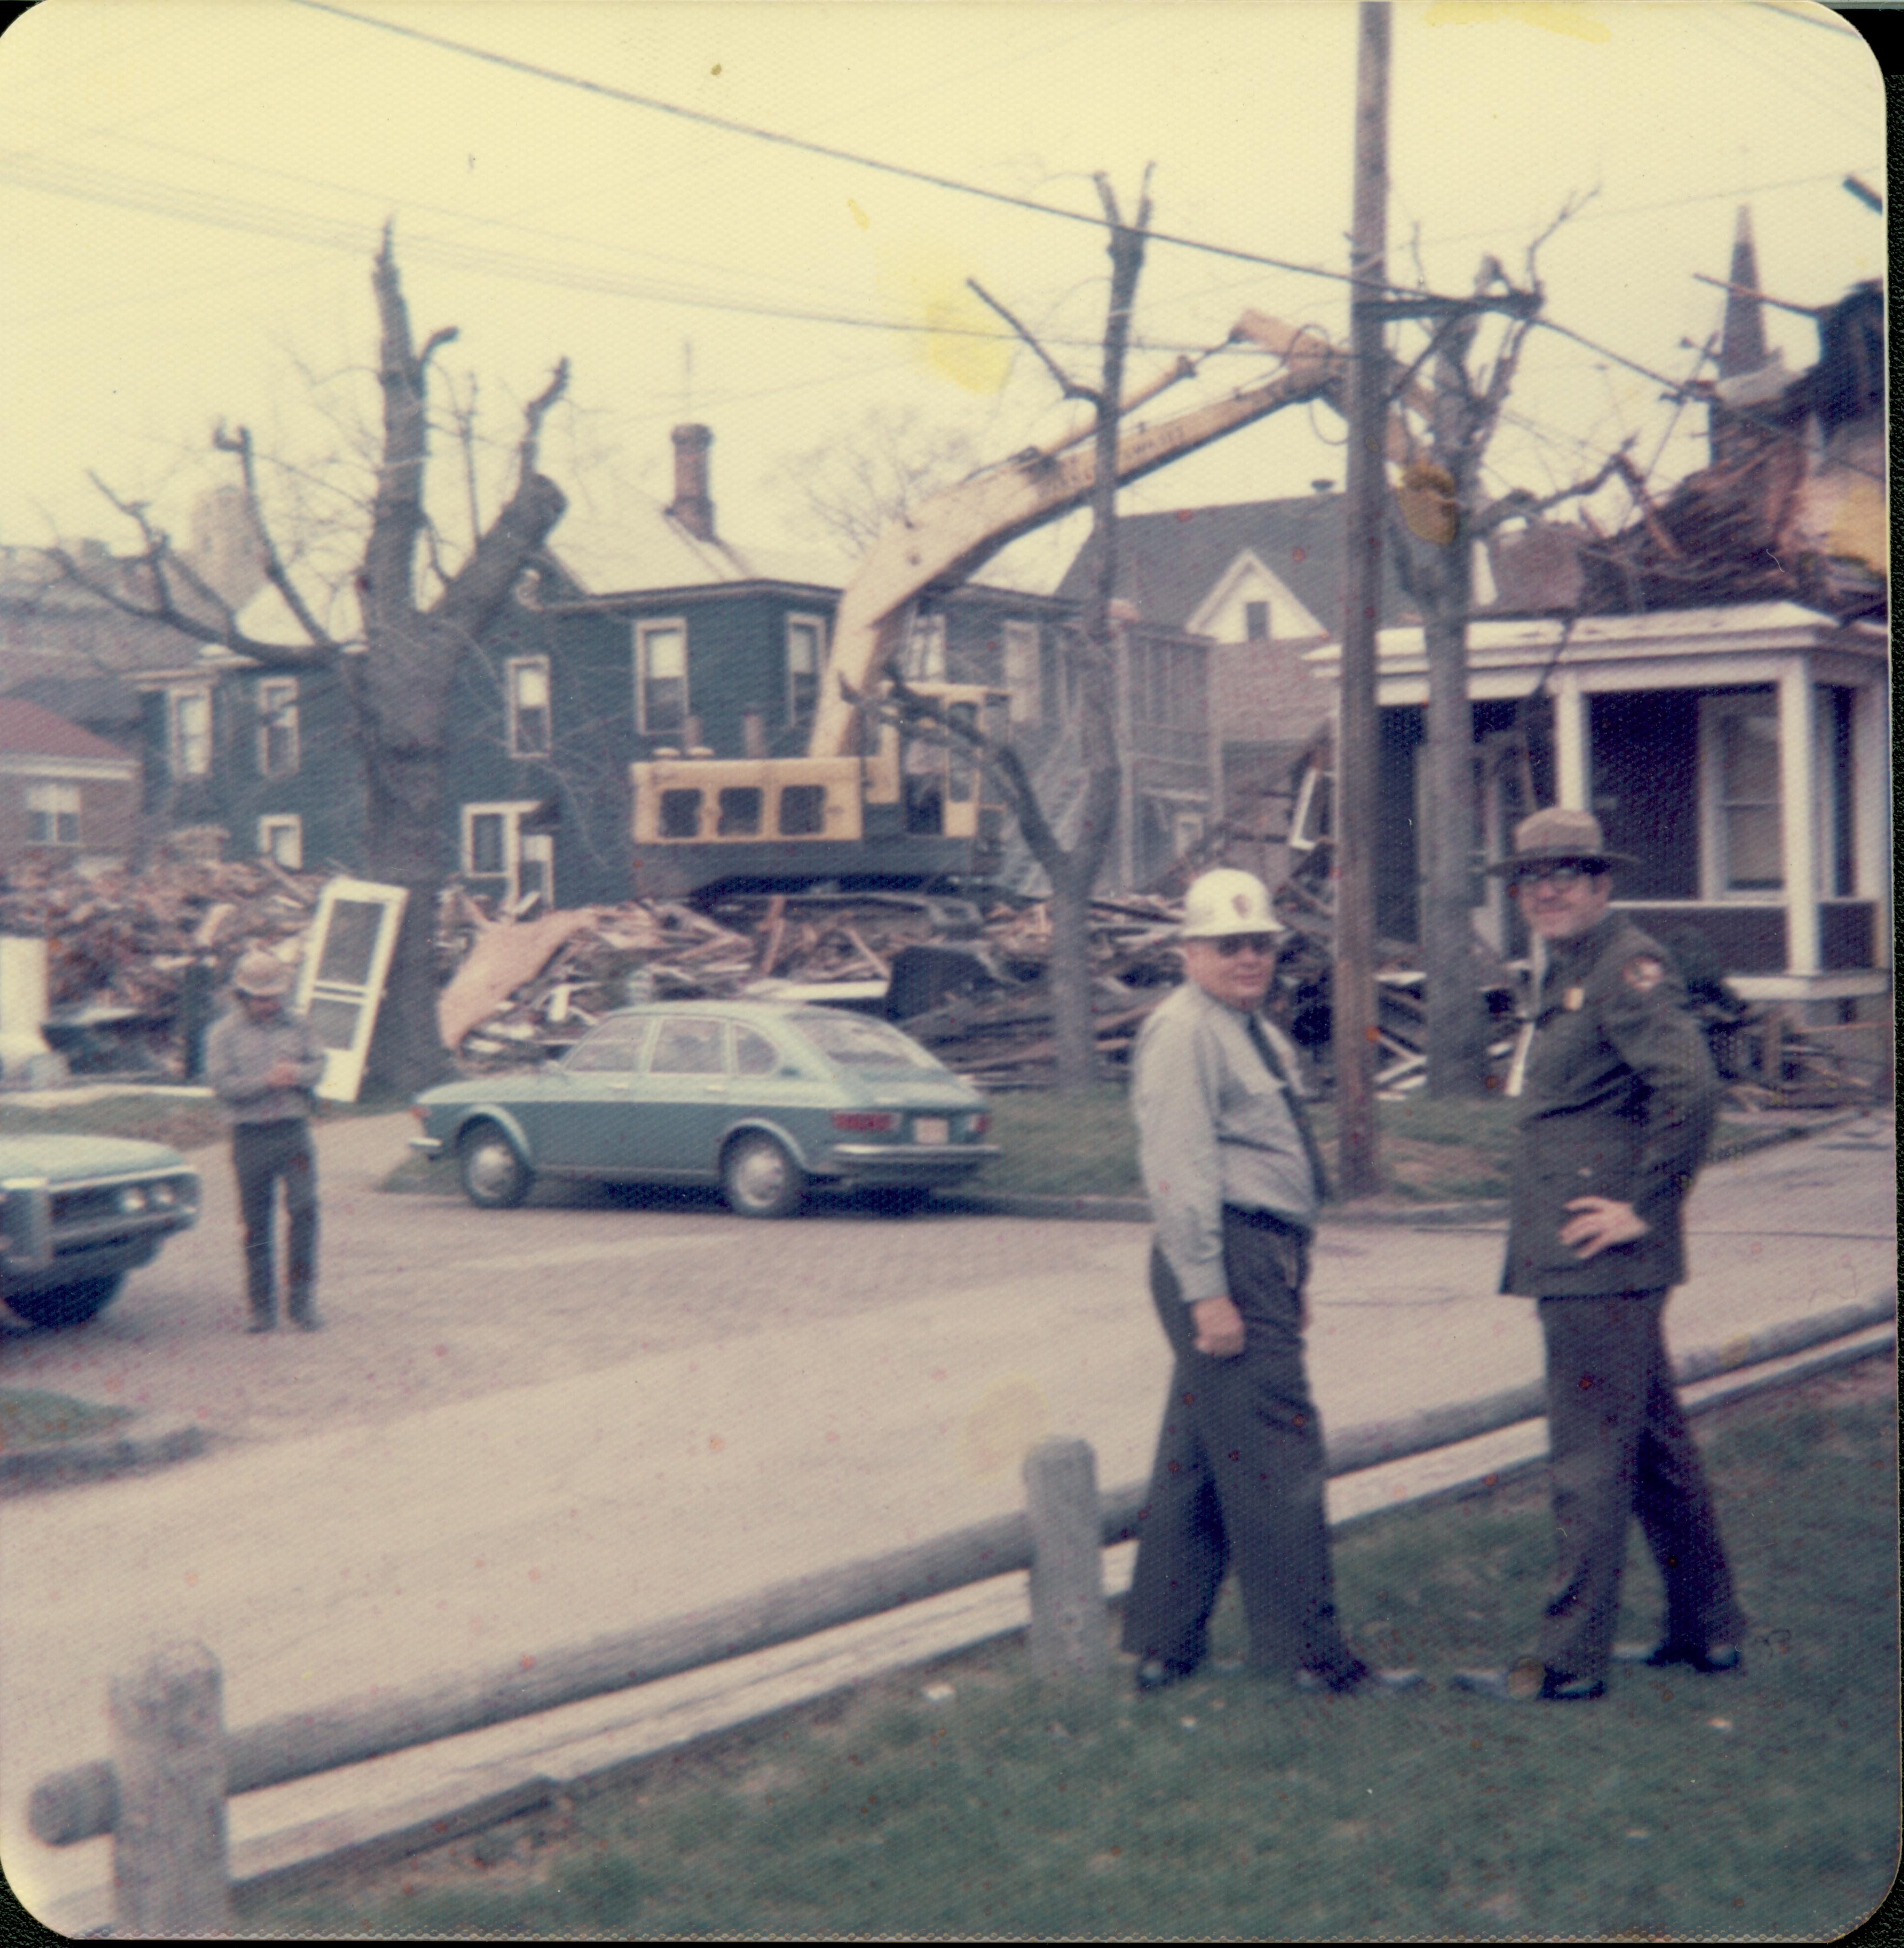 House owned by William Hermes in process of being razed, Block 7, Lot 8, along 8th Street.  Dark house in background owned by Eleanor Pruet. Maintenance Worker Tom Pacha in hard hat on left, Supt. Al Banton in hard hat center, and Ranger Chet Hamilton watch progress. Area is now Visitor Center. Looking Northwest from South of Jackson Street along alley. Hermes, Pruett, Jackson Street, razing, Visitor Center